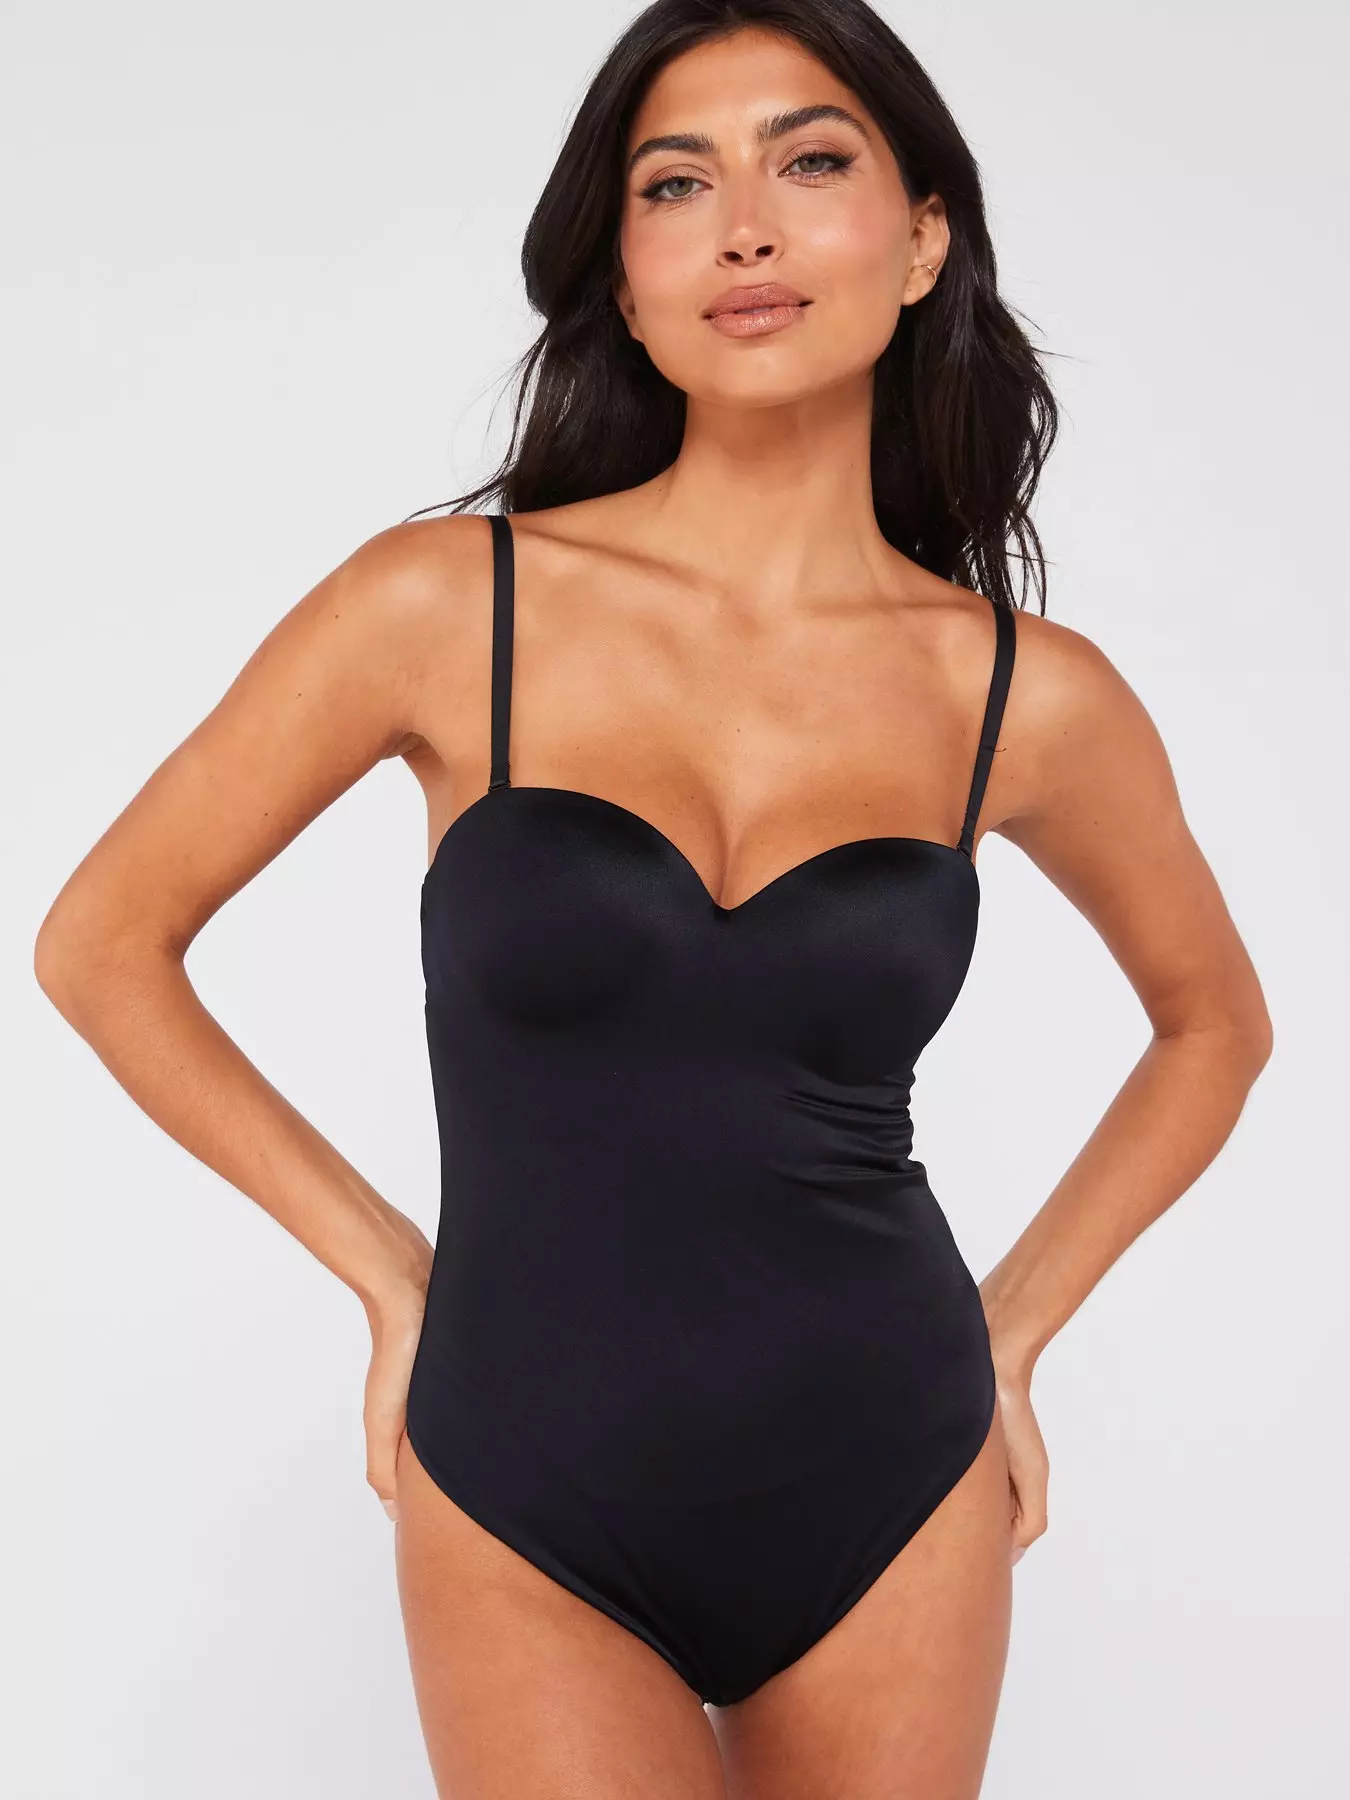 Skims Everyday Sculpt Crotchless Shaper Bodysuit In Cocoa